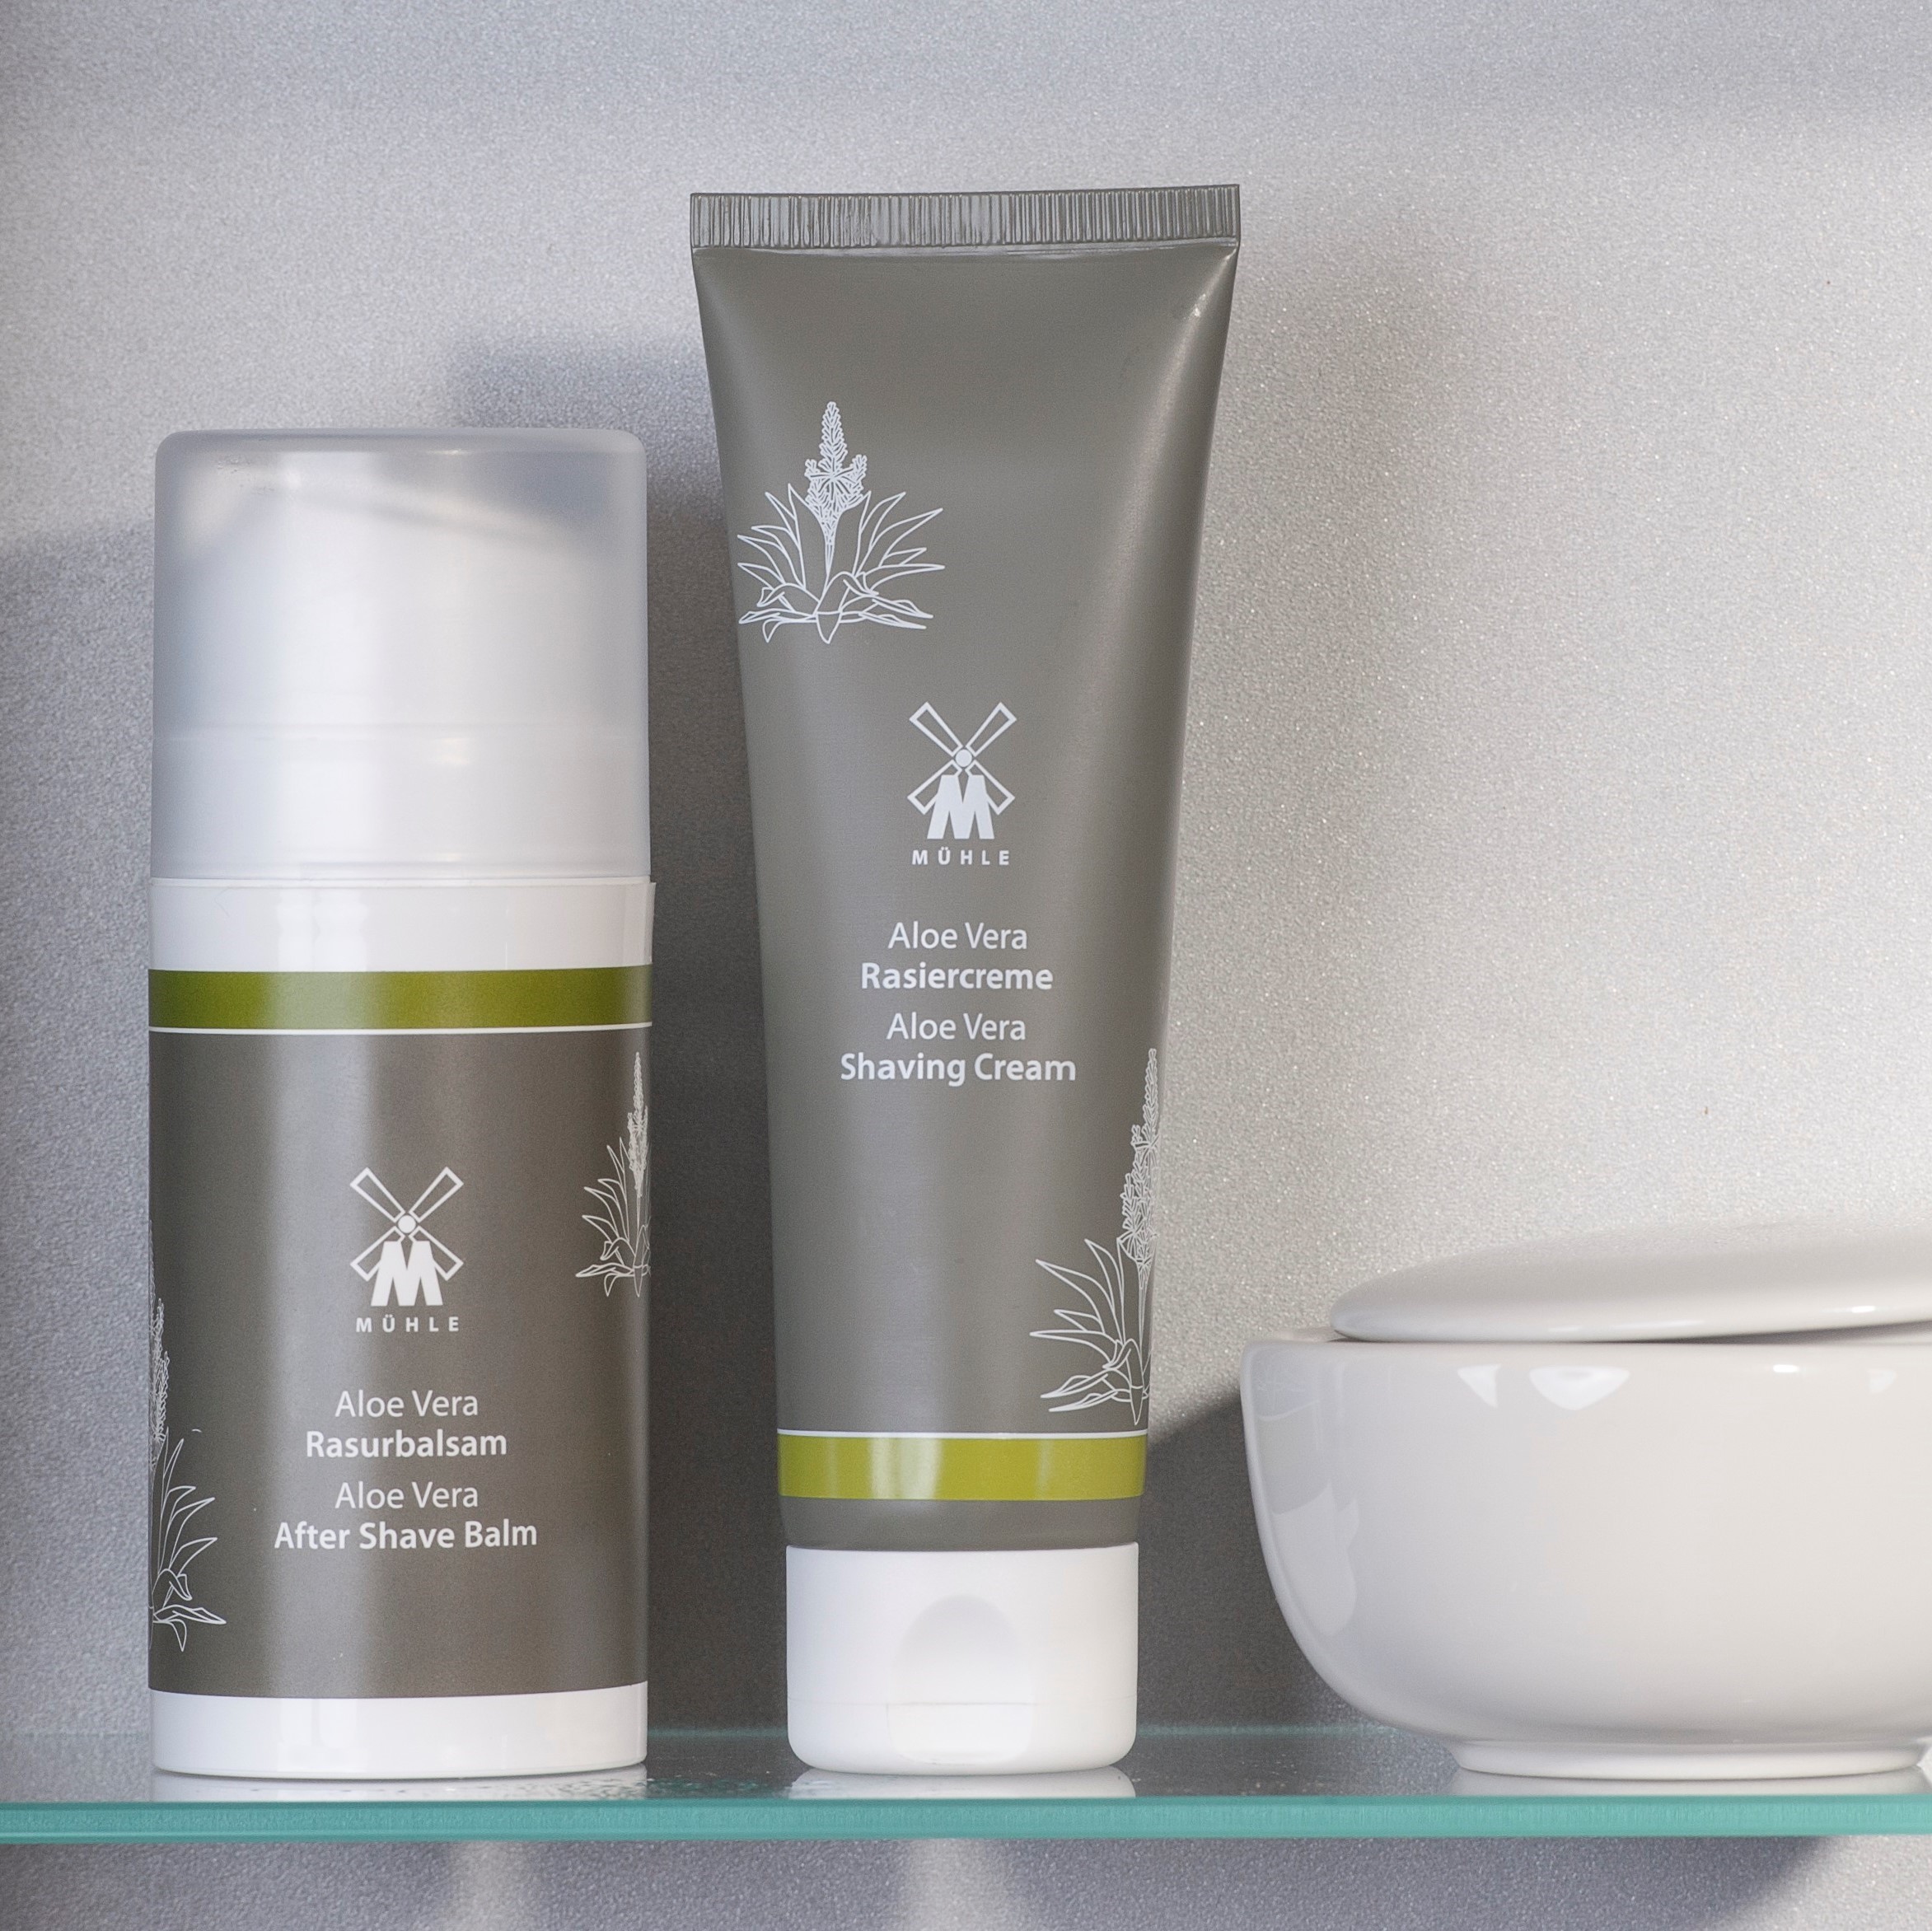 Your pre and post shave care sorted: the MÜHLE Aloe Vera shave care collection